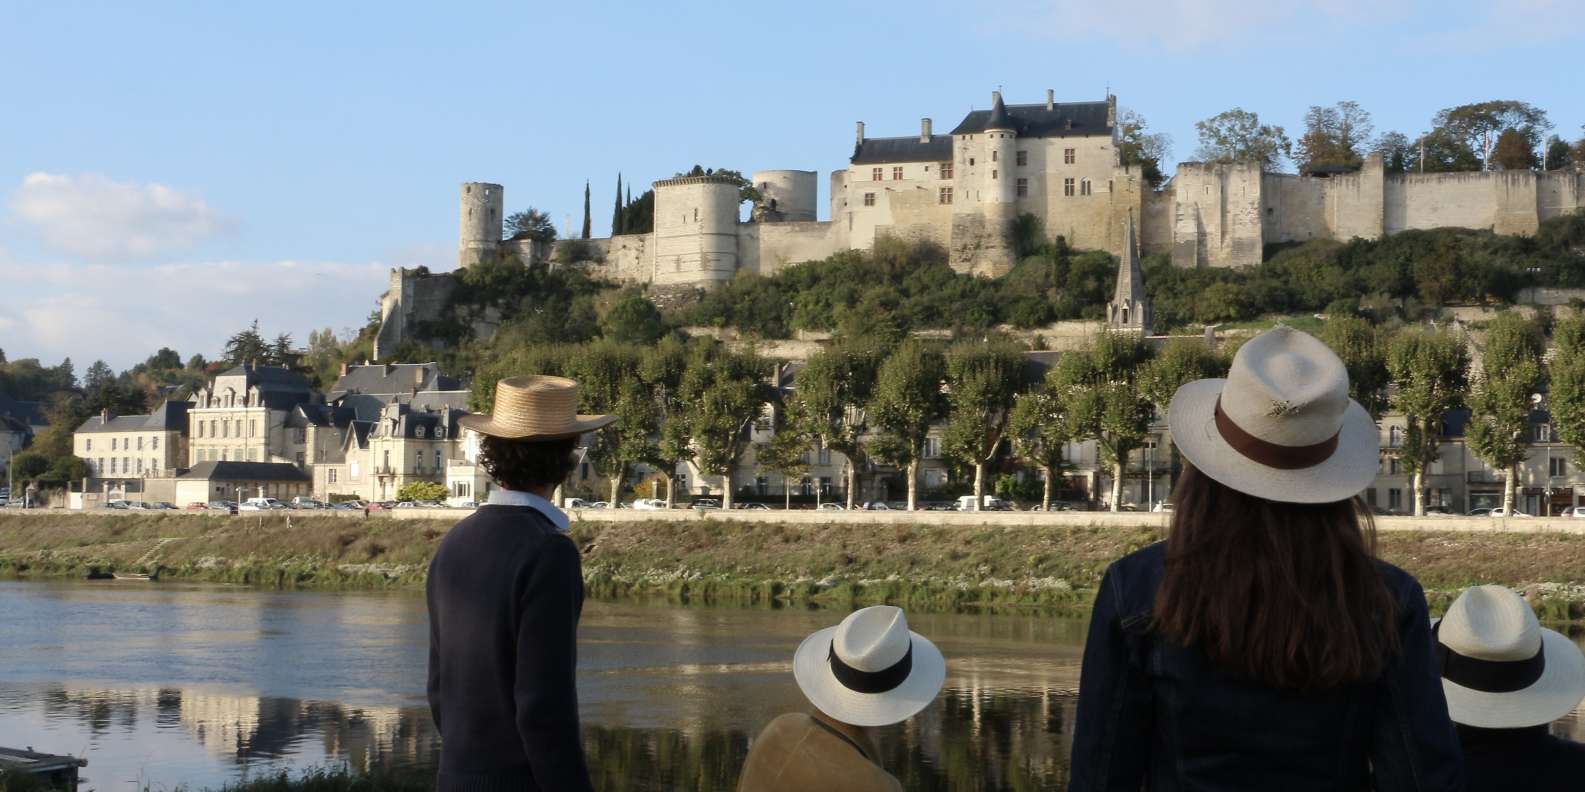 things to do in Amboise